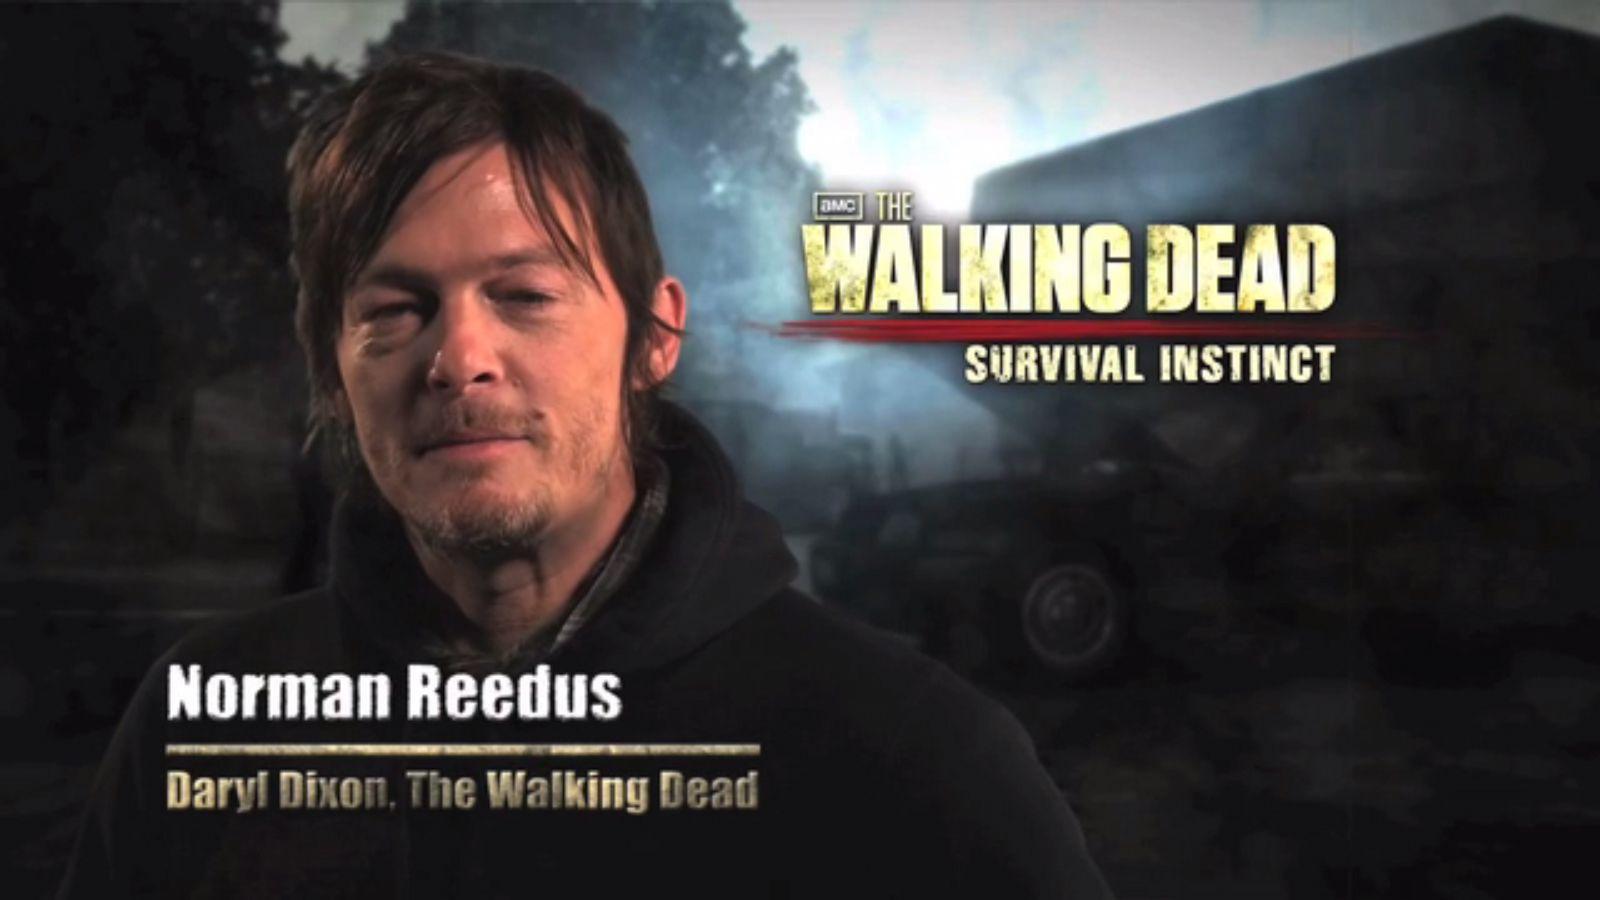 Michael Rooker and Norman Reedus Discuss The Walking Dead: Survival